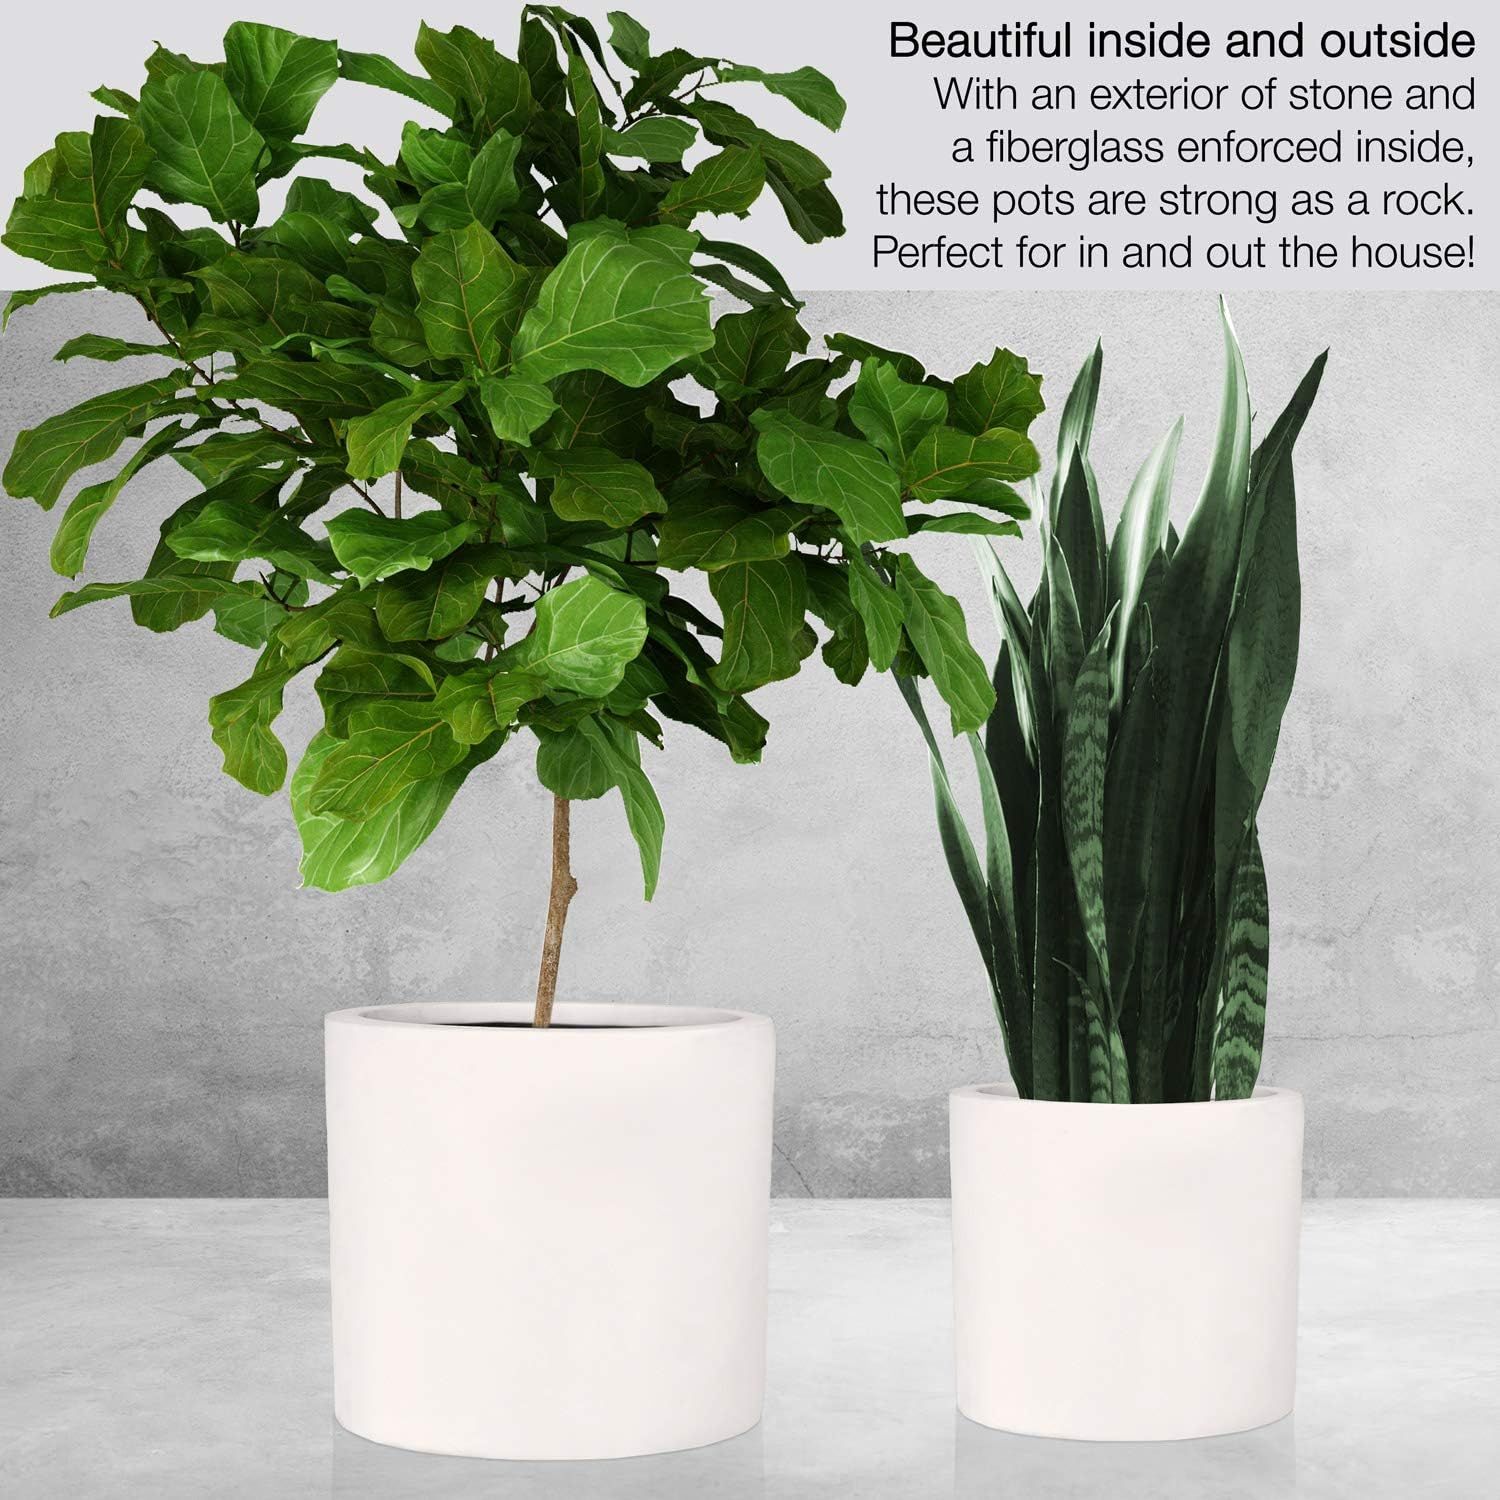 Fox & Fern 15" Large Planter Fits Plant Stand - Drainage Plug - Indoor Outdoor - Matte White | Amazon (US)